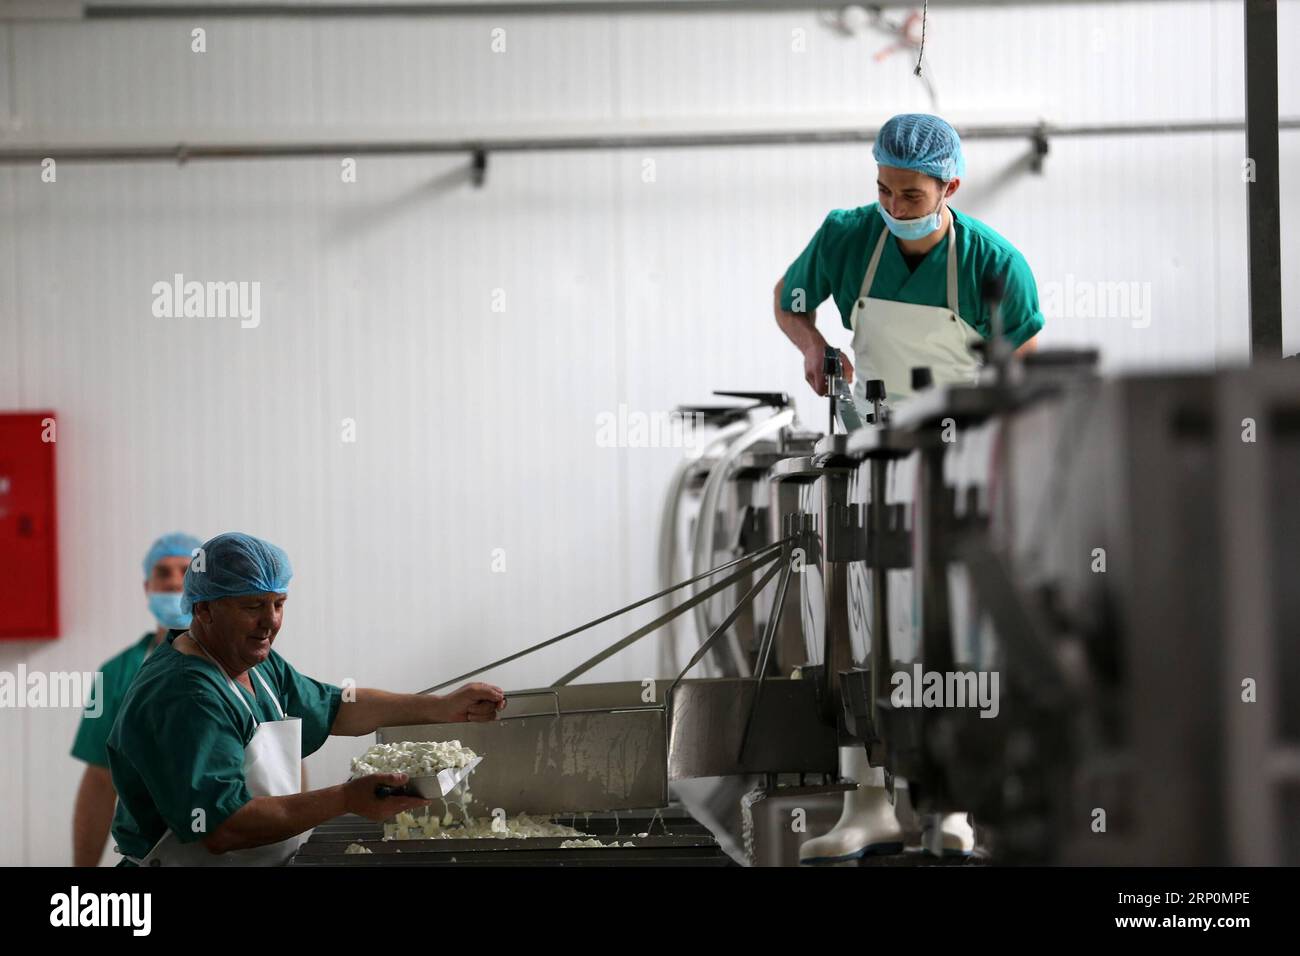 (180519) -- CORINTH, May 19, 2018 -- People work at a cheese factory in Kalliani village of Corinth, some about 70 Km west of Athens, Greece, on May 16, 2018. In the highlands of Corinth prefecture at the Peloponnese peninsula, just two hours from Athens, local agricultural small businesses turn to extroversion to survive the economic crisis. To go with Feature: Greek agricultural community more extrovert in seeking business opportunities. ) (dtf) GREECE-CORINTH-AGRICULTURAL-EXTROVERSION MariosxLolos PUBLICATIONxNOTxINxCHN Stock Photo